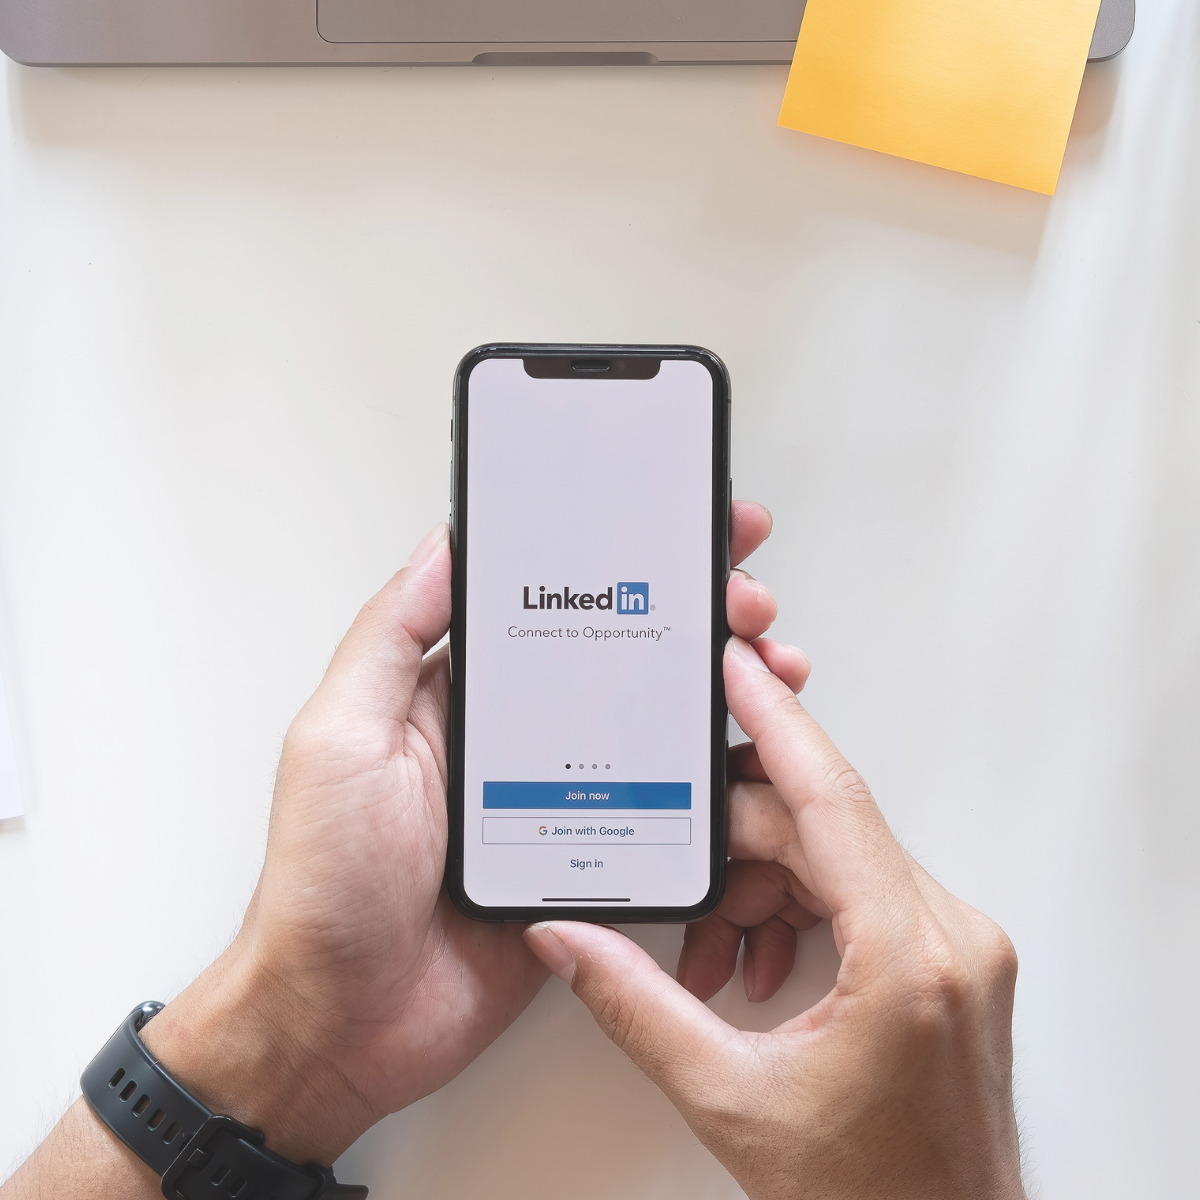 Person holding iPhone with LinkedIn sign in page showing on phone screen